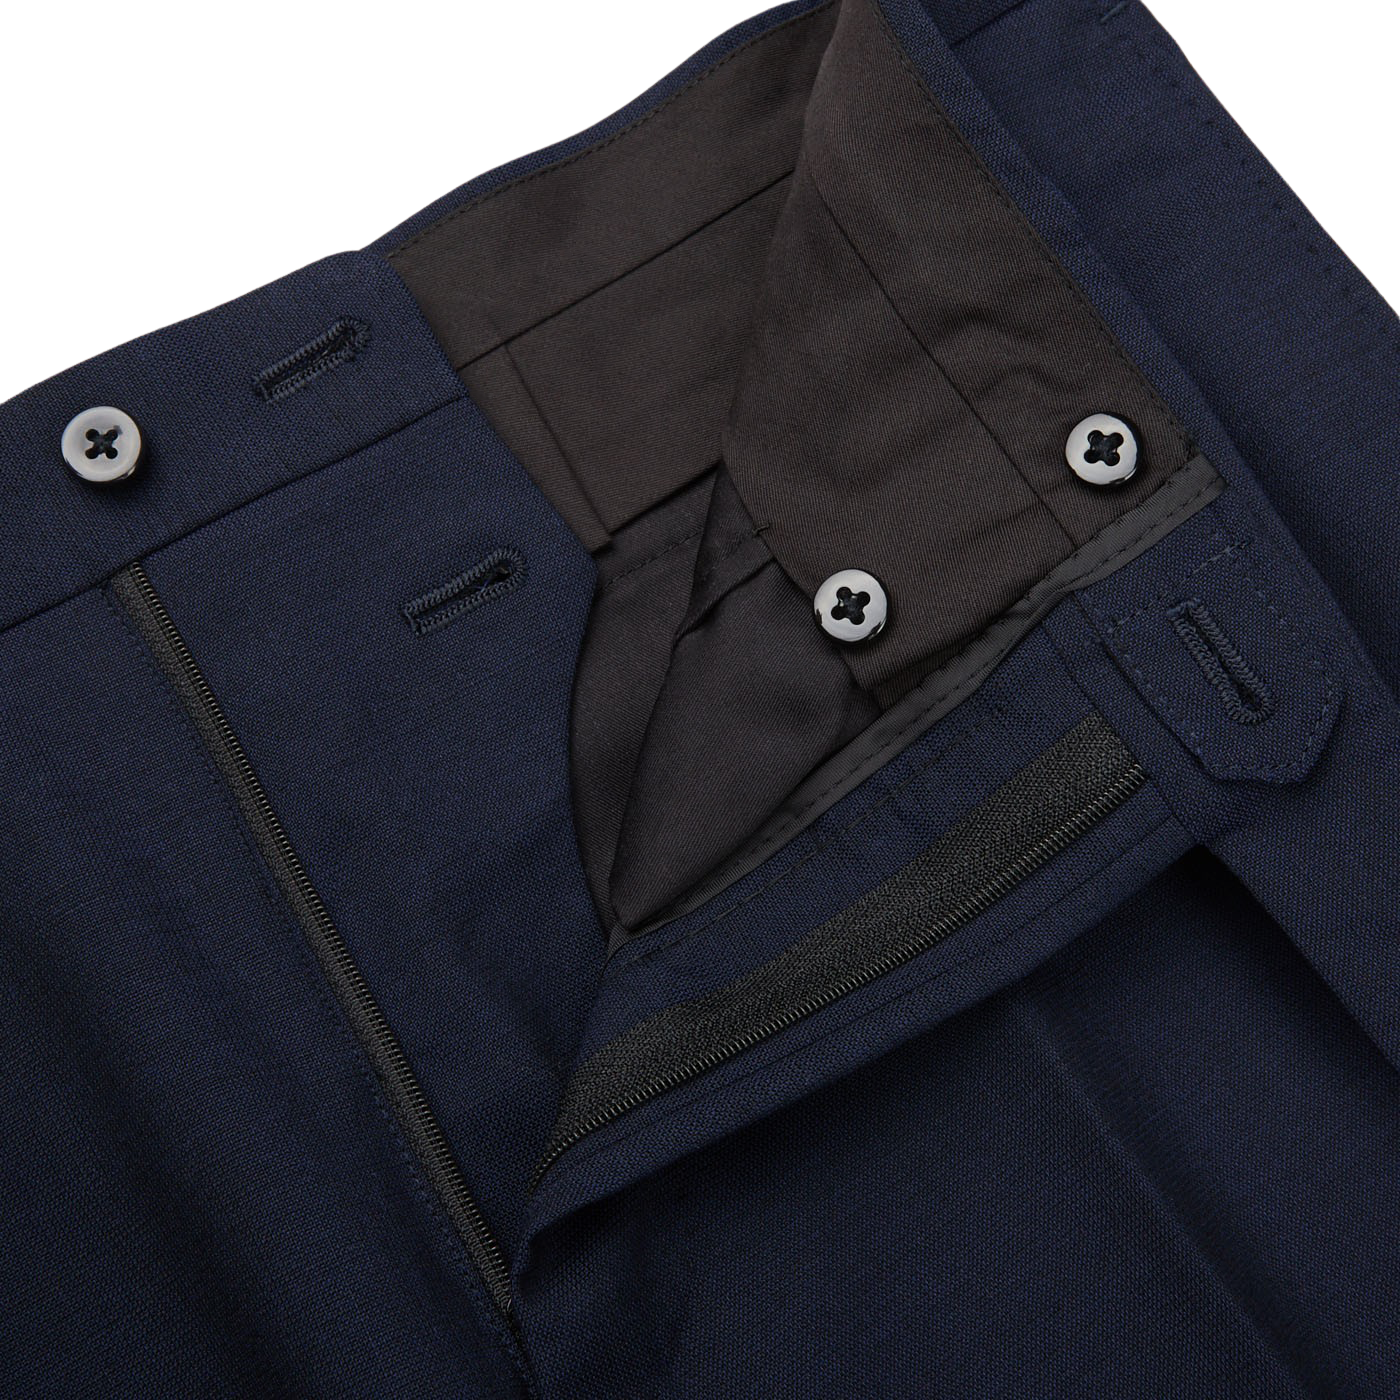 Close-up of a Ring Jacket navy blue high twist wool suit, showing the buttoned waistband and zipper, with detailed stitching and fabric texture visible.